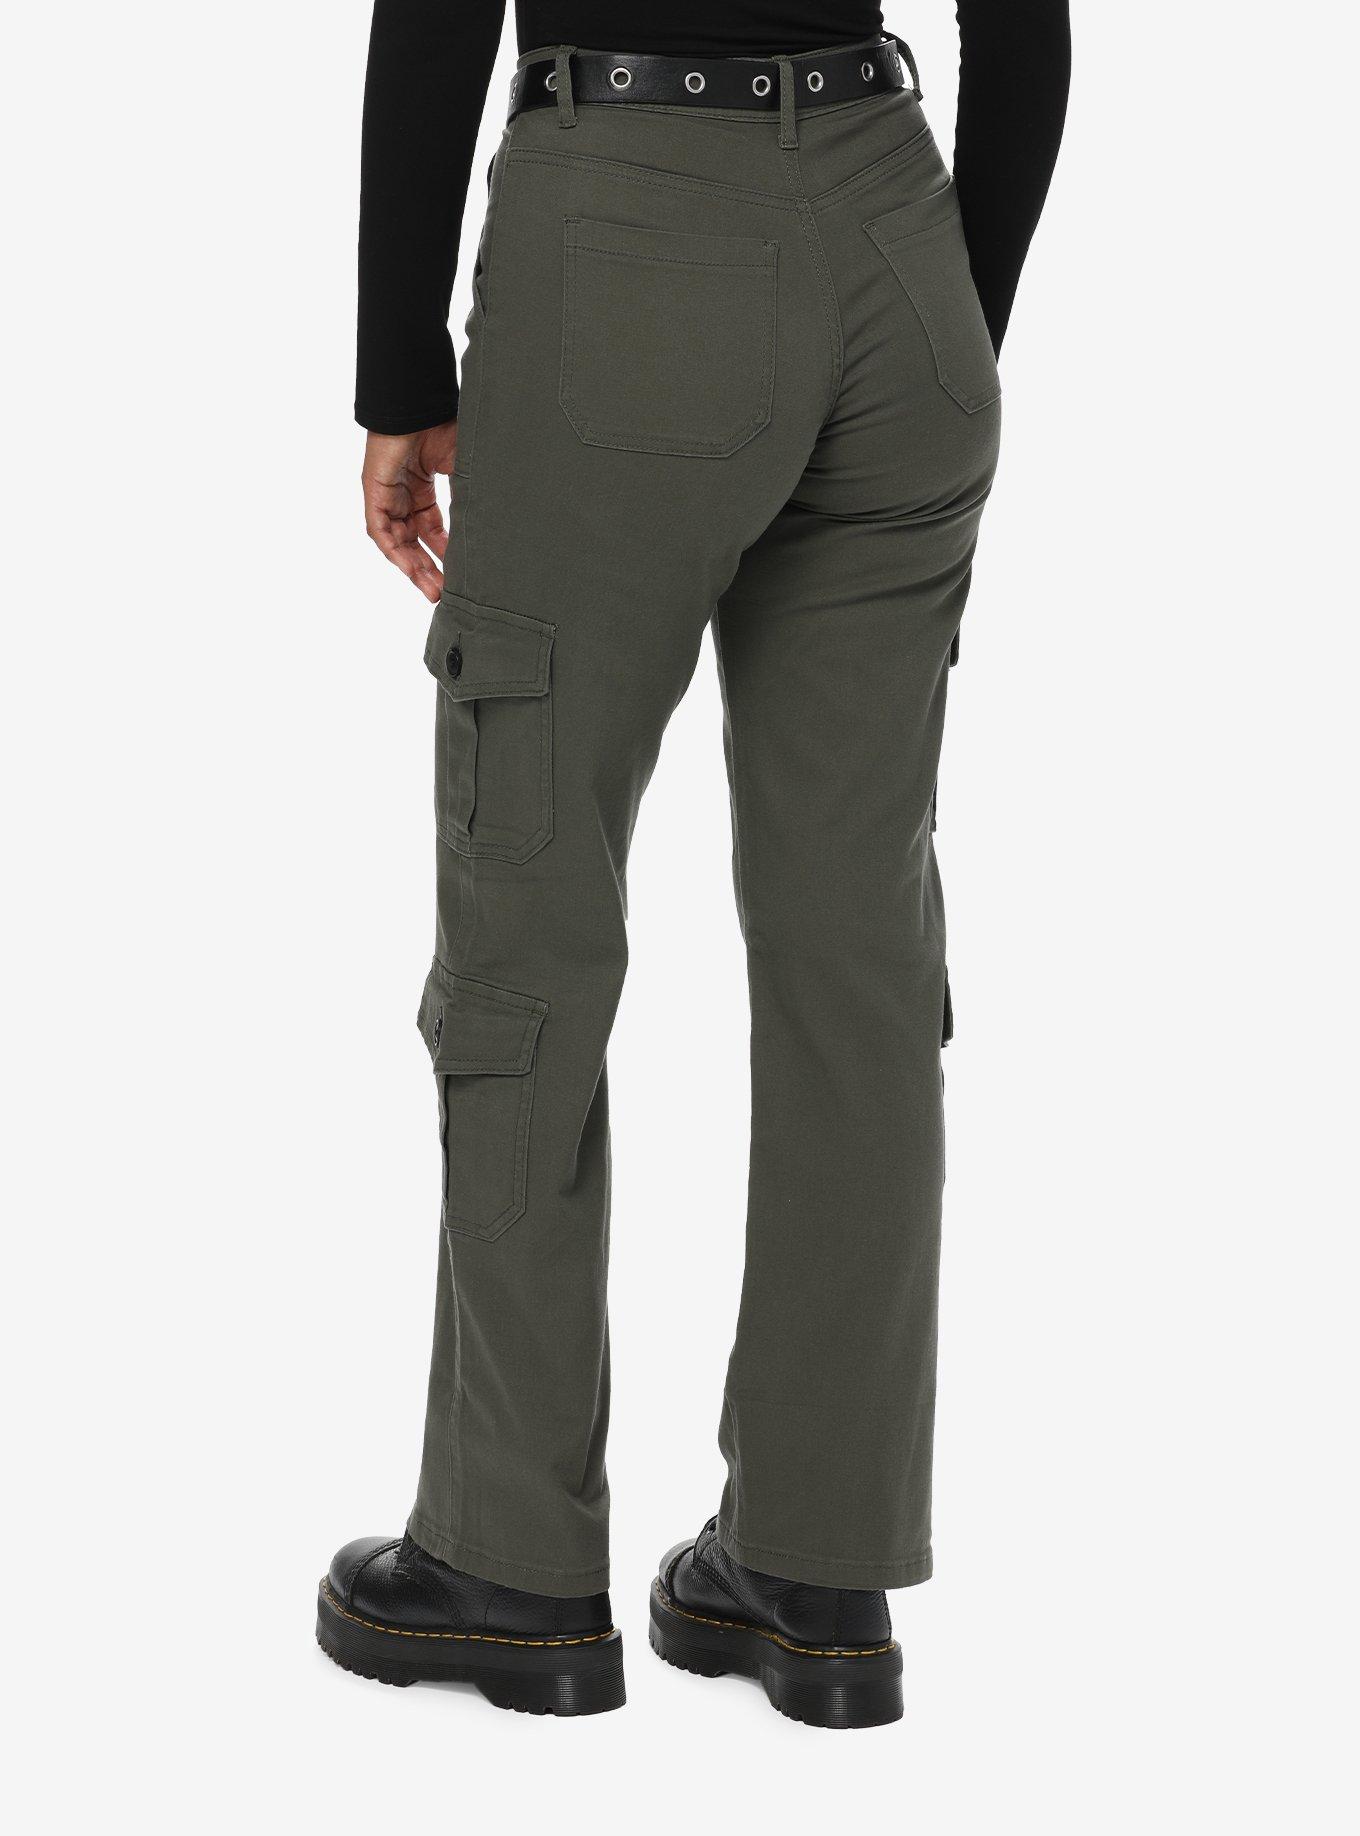 Social Collision Olive Cargo Pants With Belt | Hot Topic